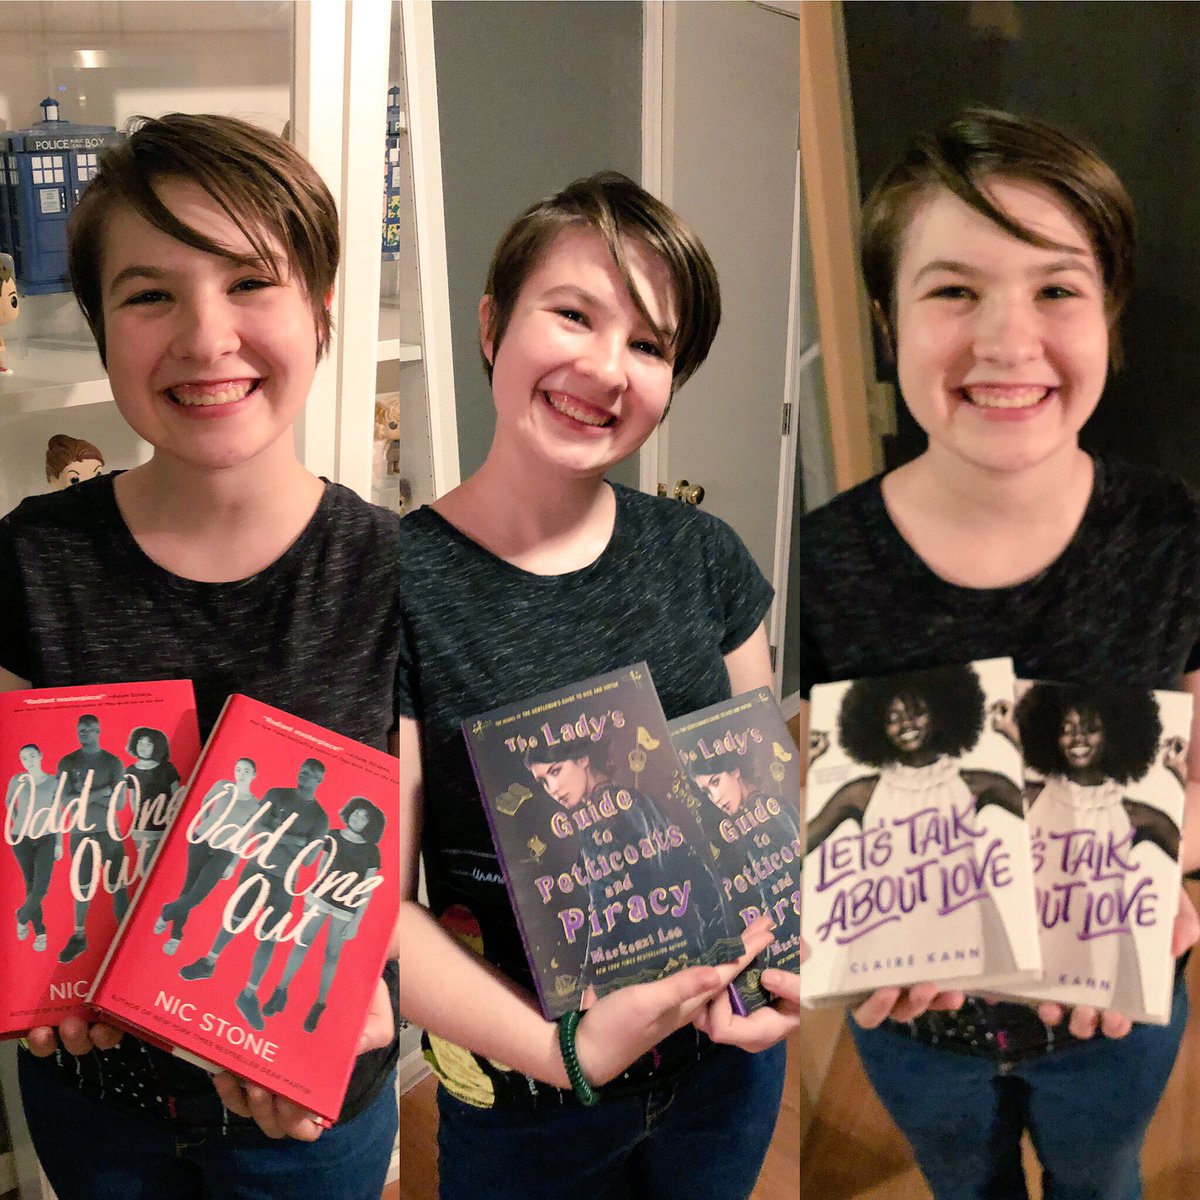 When your family shows their support for your project, they don’t just send one book, they send 6! 🏳️‍🌈♥️ #Girlscoutgoldaward @getnicced @KannClaire @themackenzilee